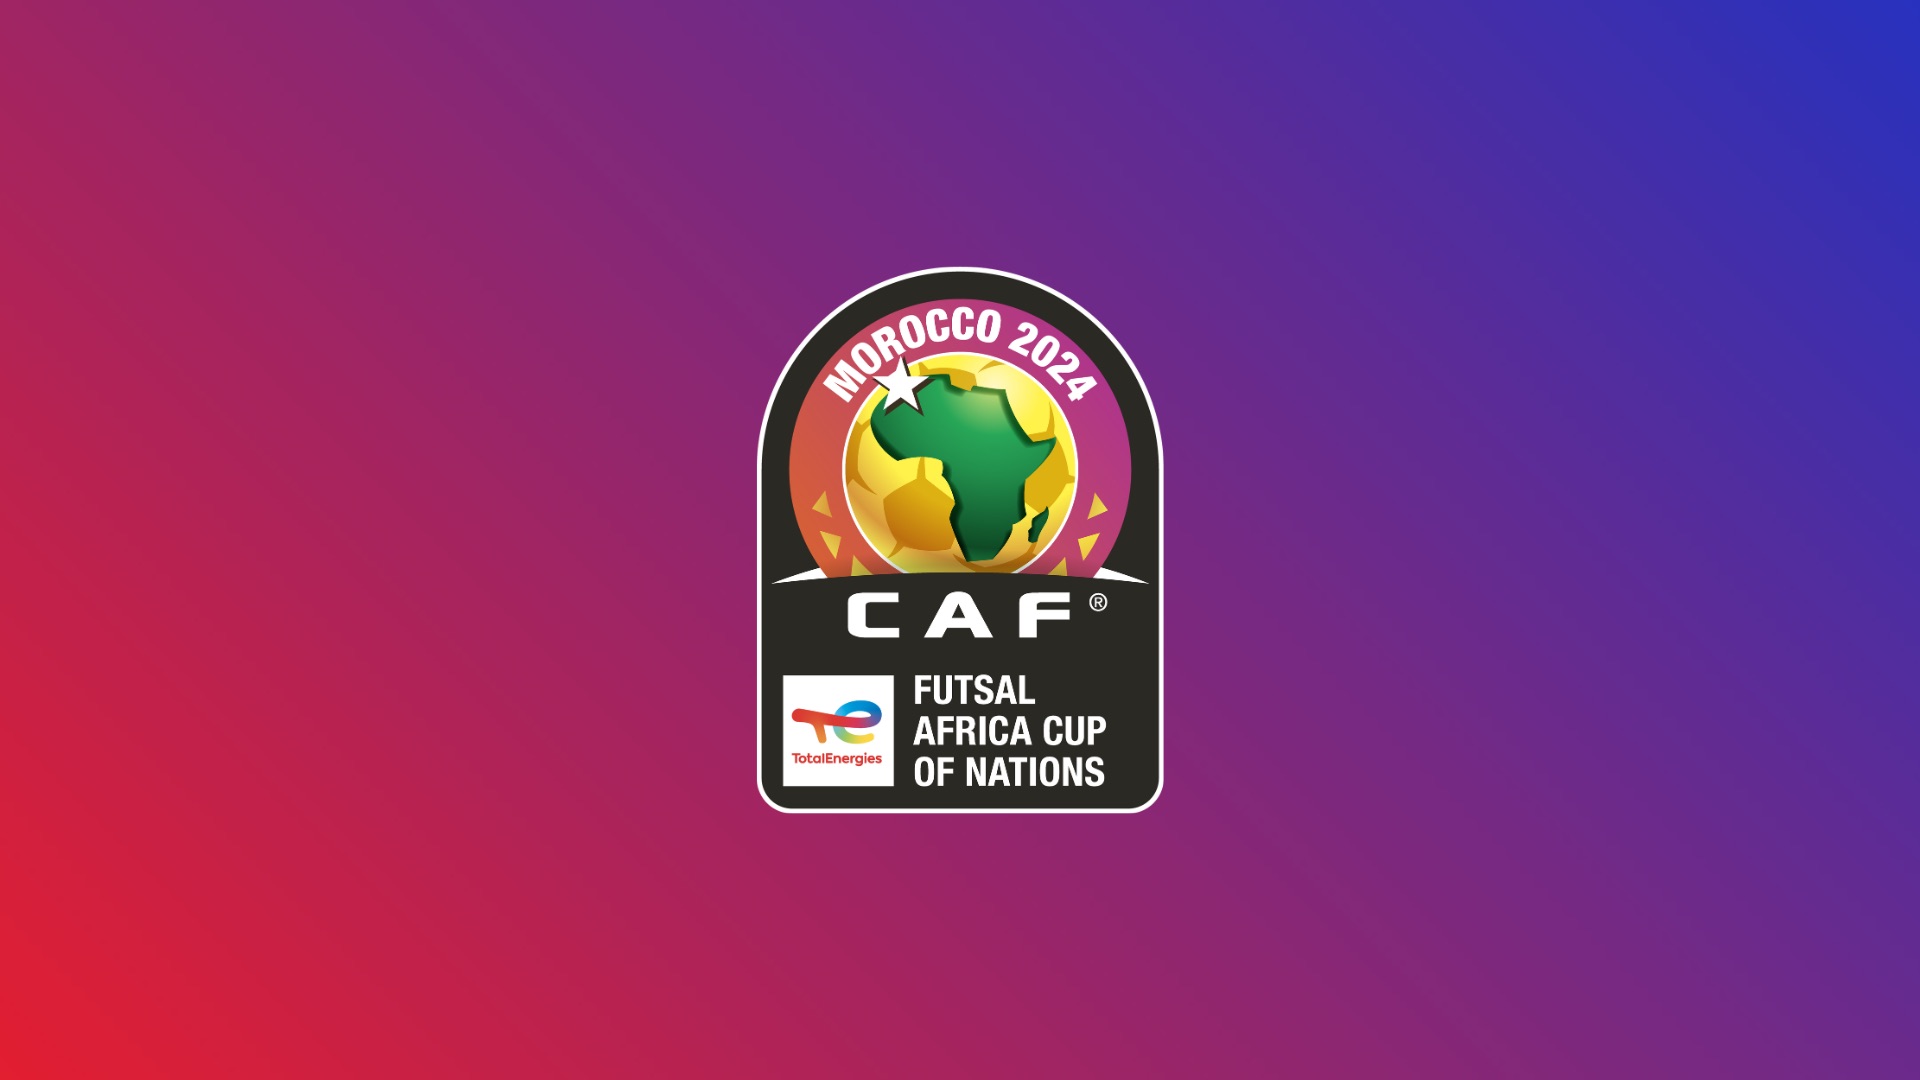 Media Accreditation for TotalEnergies CAF Futsal Africa Cup of Nations